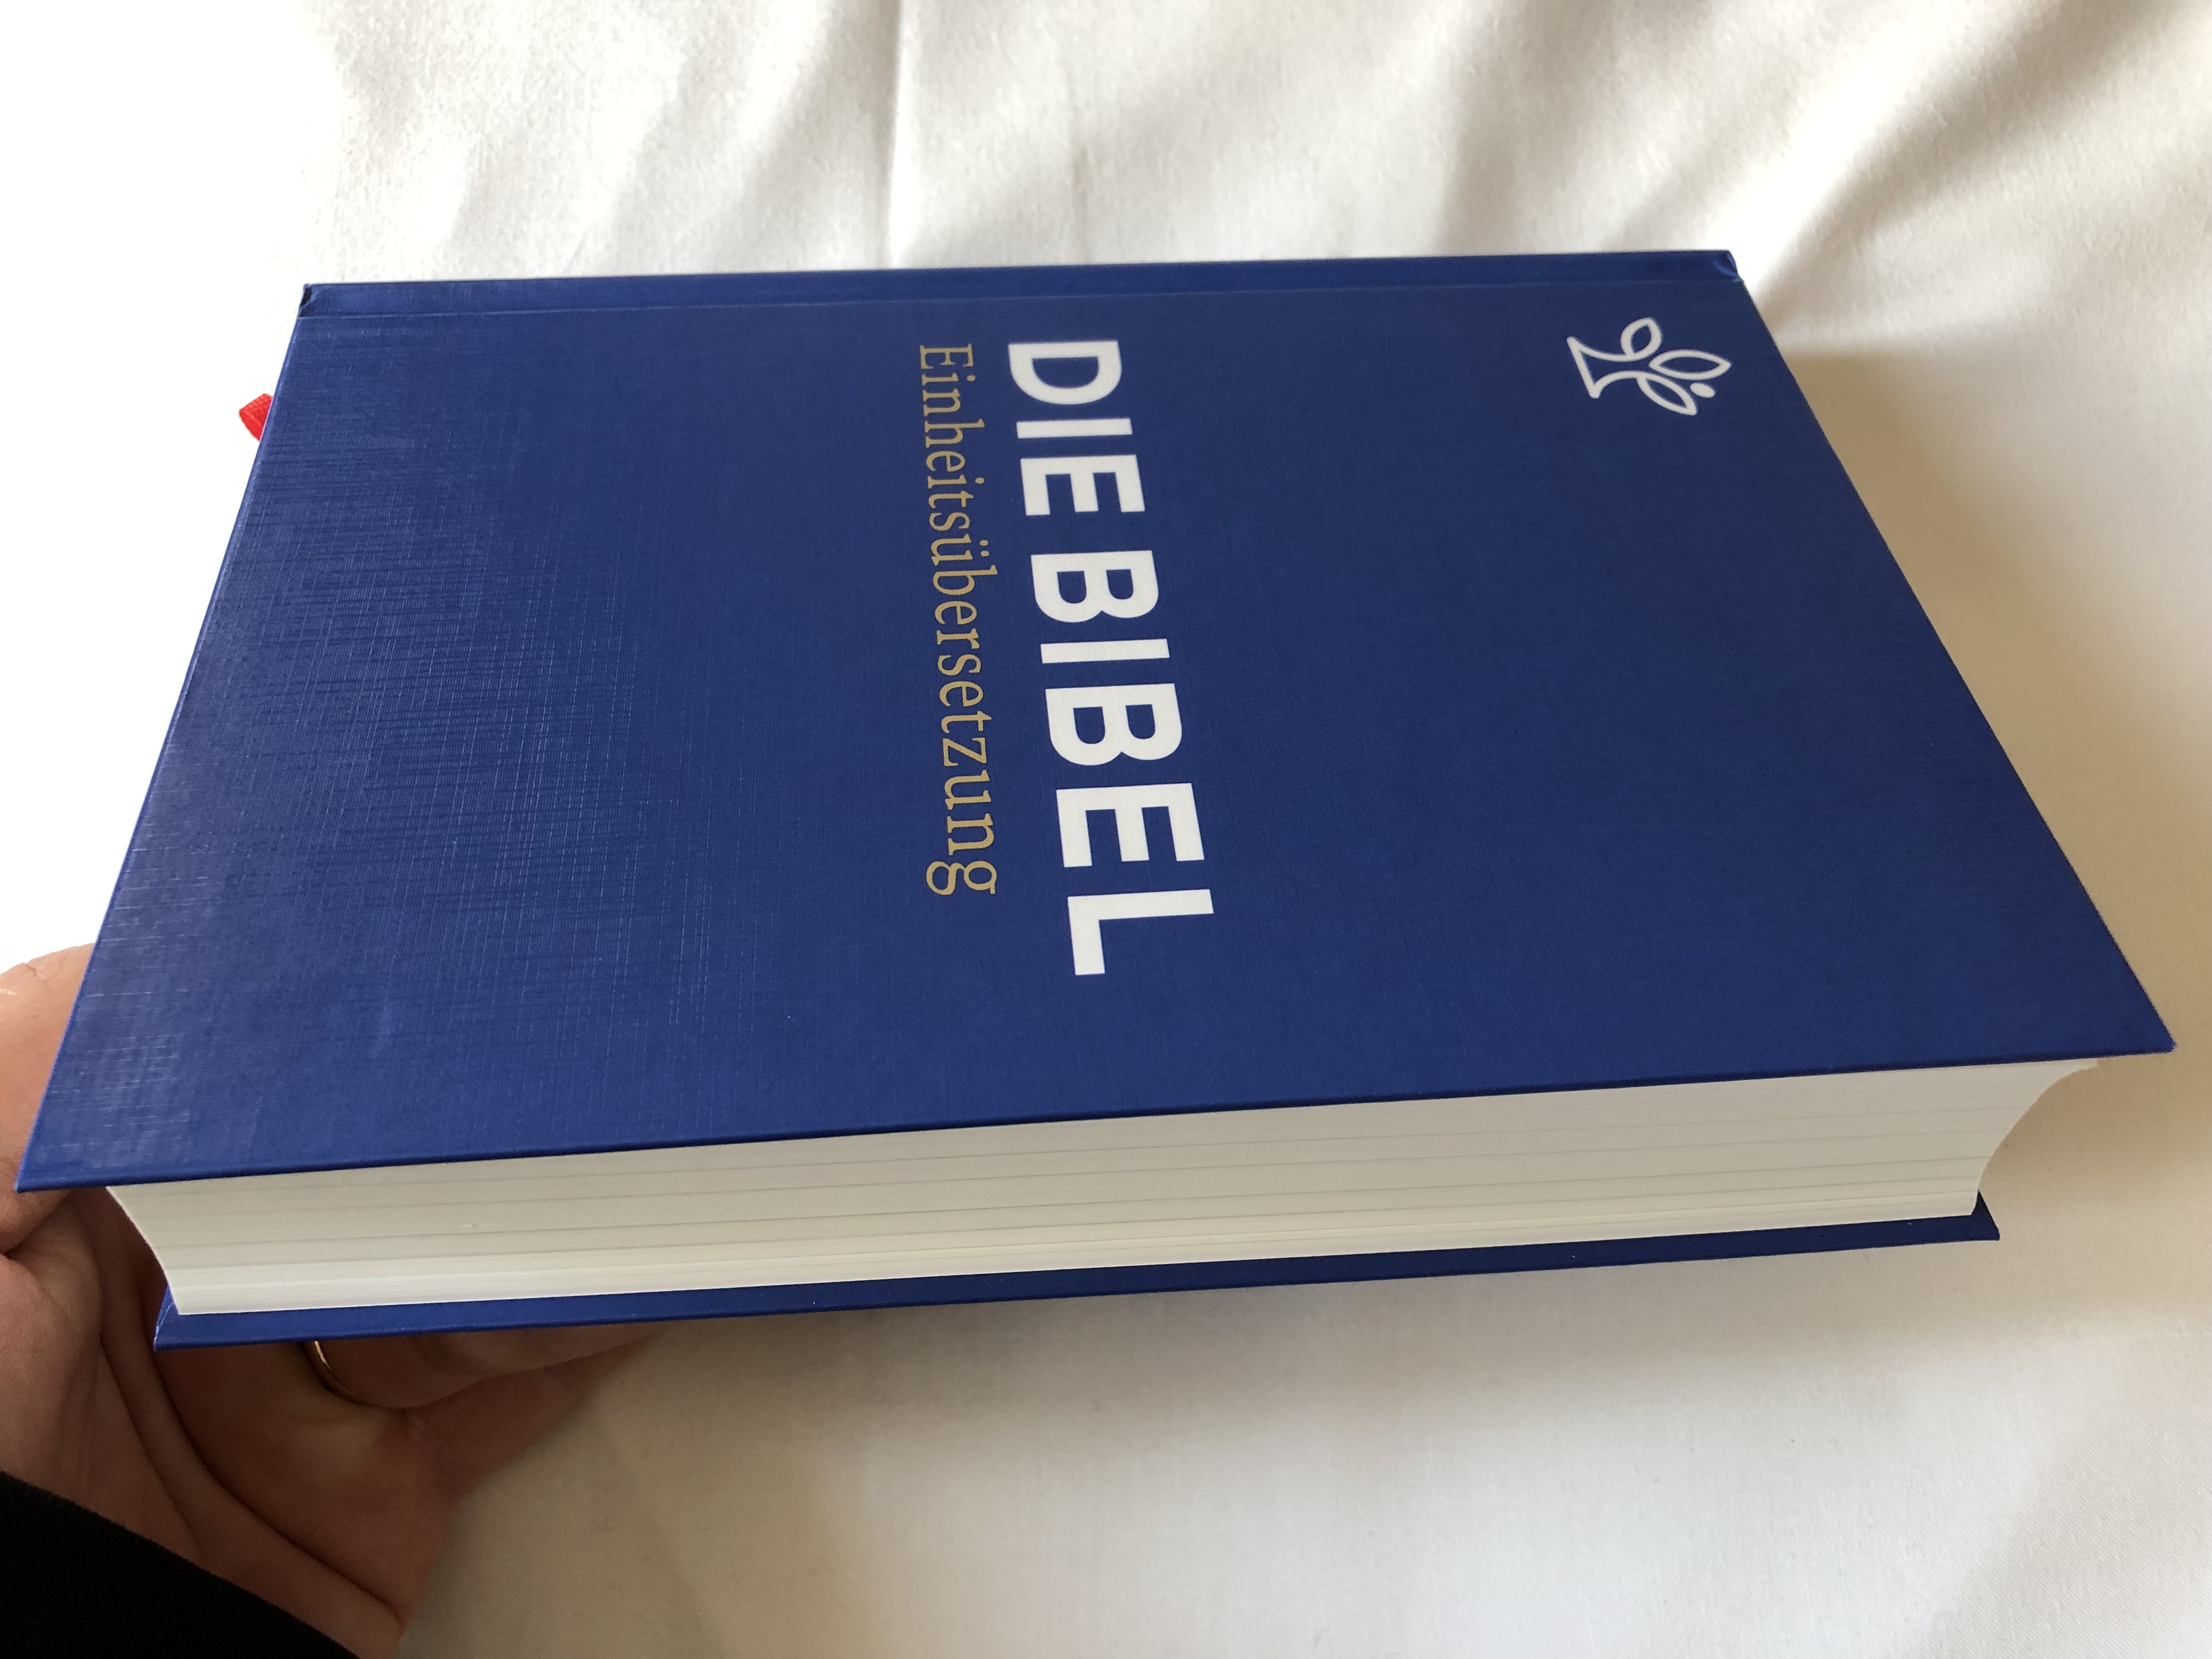 die-bibel-einheits-bersetzung-schulbibel-blau-german-language-holy-bible-unitary-translation-blue-contains-deuterocanonical-books-with-book-introductions-maps-notes-bible-history-timetable-hardcover-2017-kato-6619272-.jpg